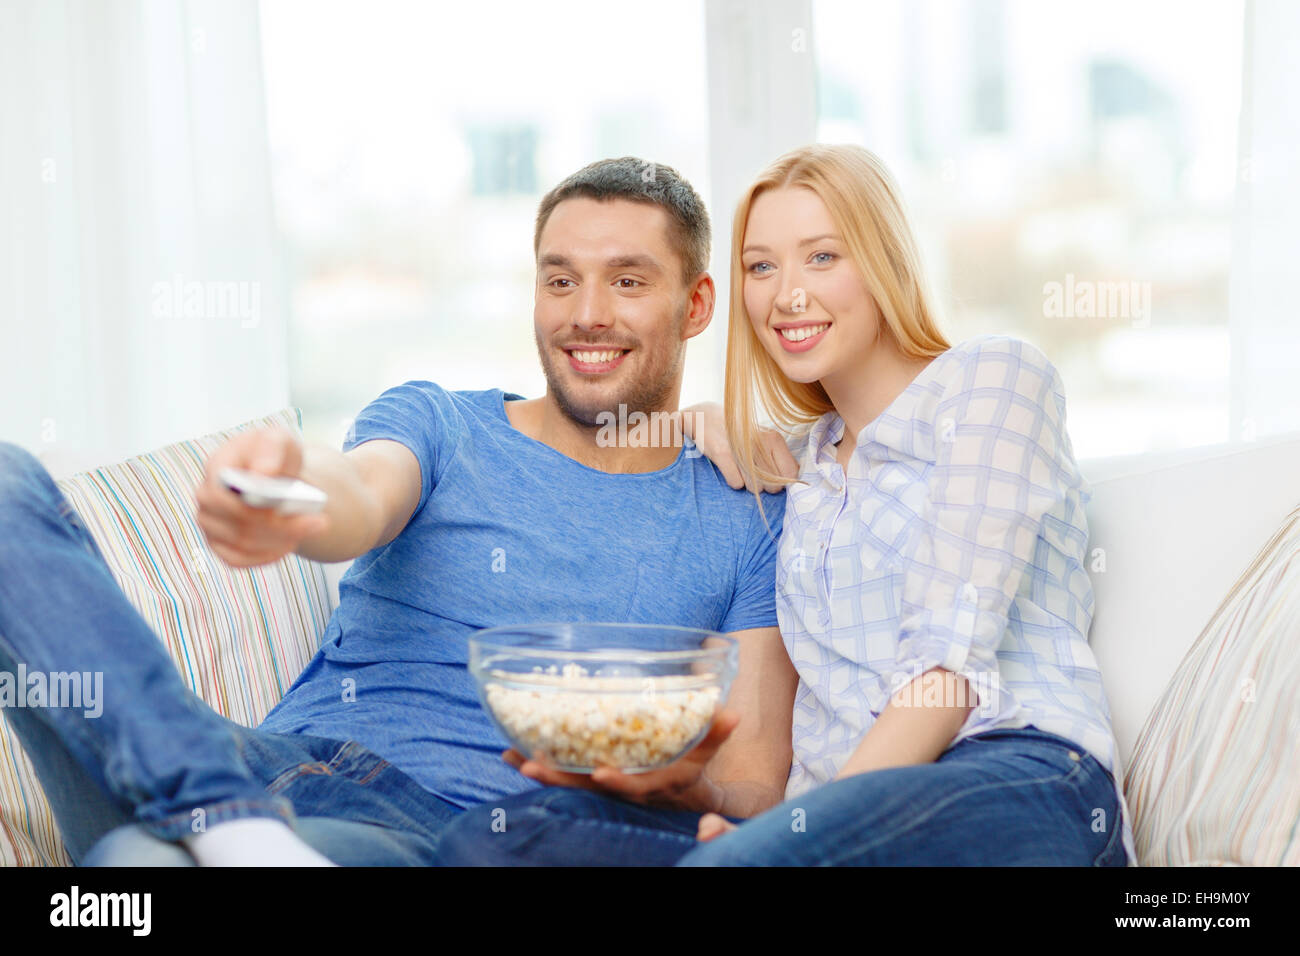 smiling couple with popcorn watching movie at home Stock Photo